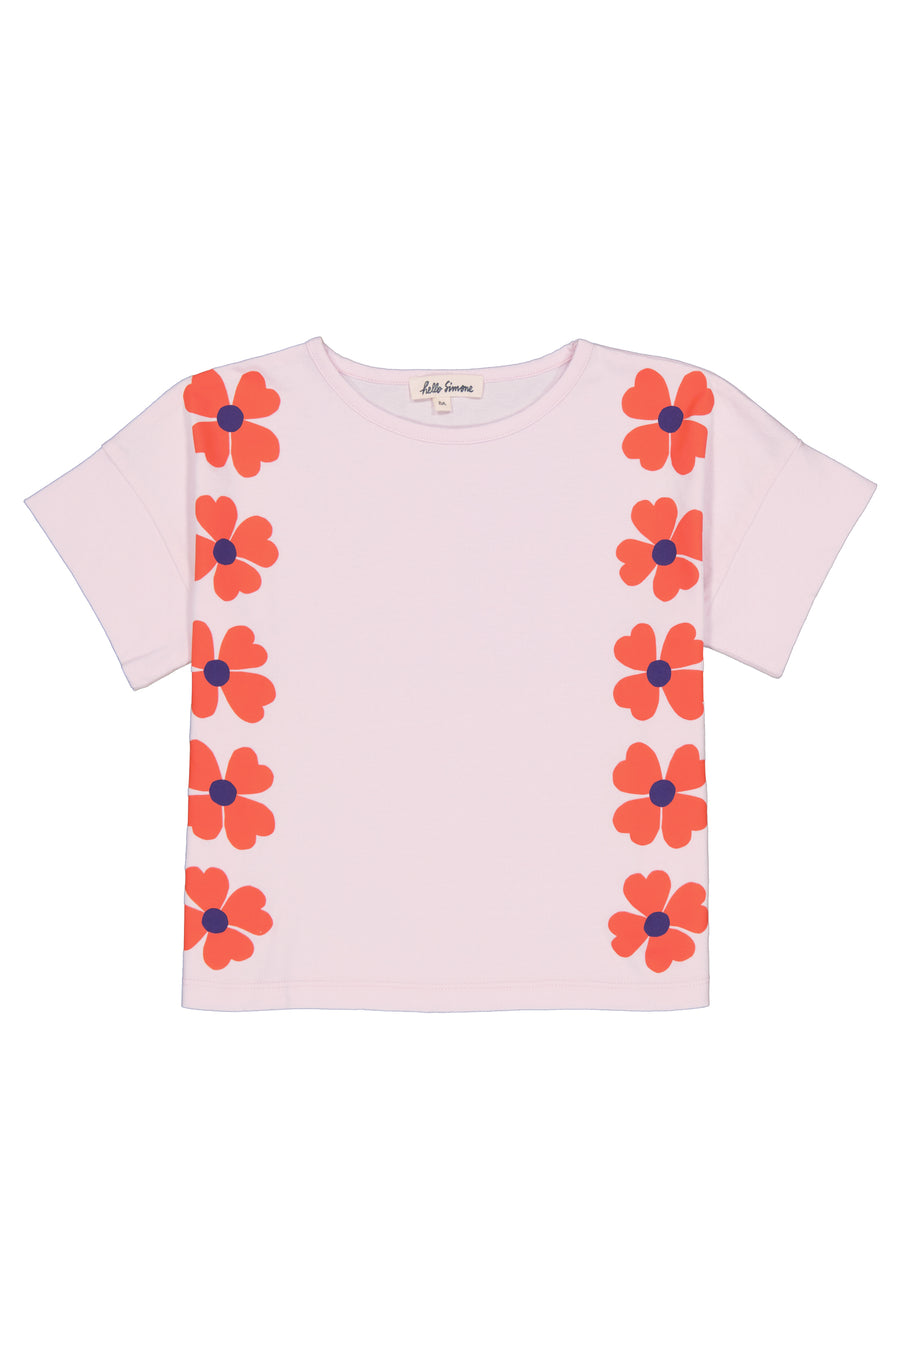 Orchid Ice t-shirt by Hello Simone